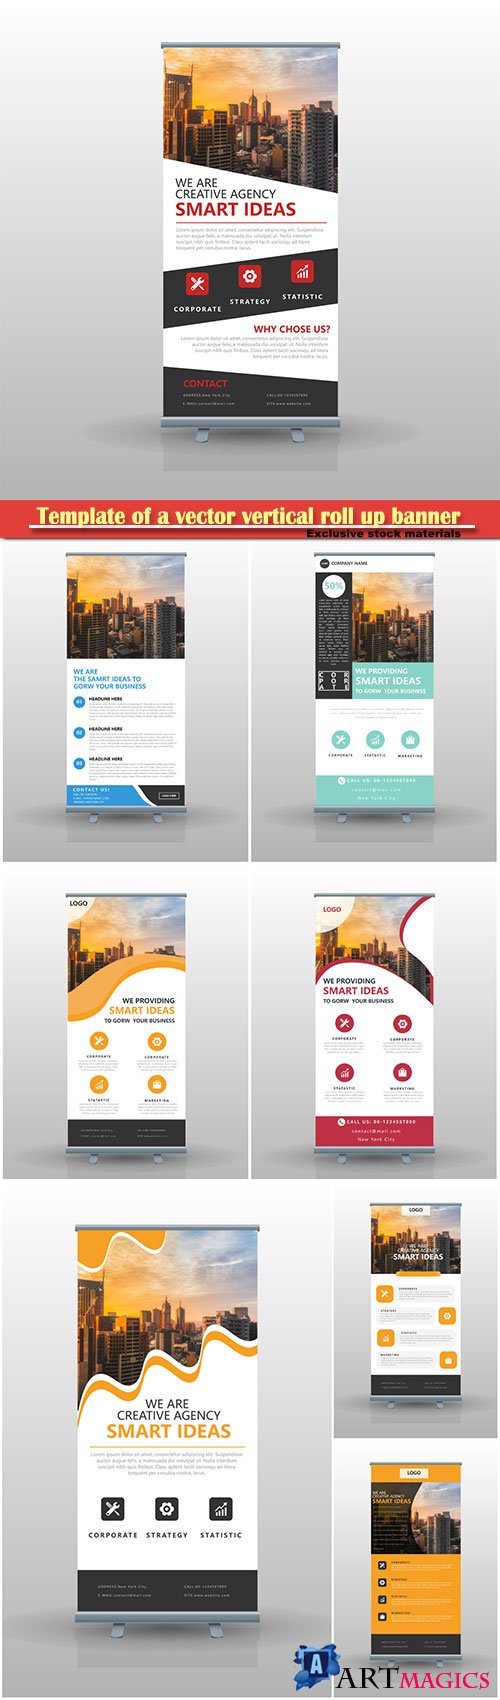 Template of a vector vertical roll up banner for business #4